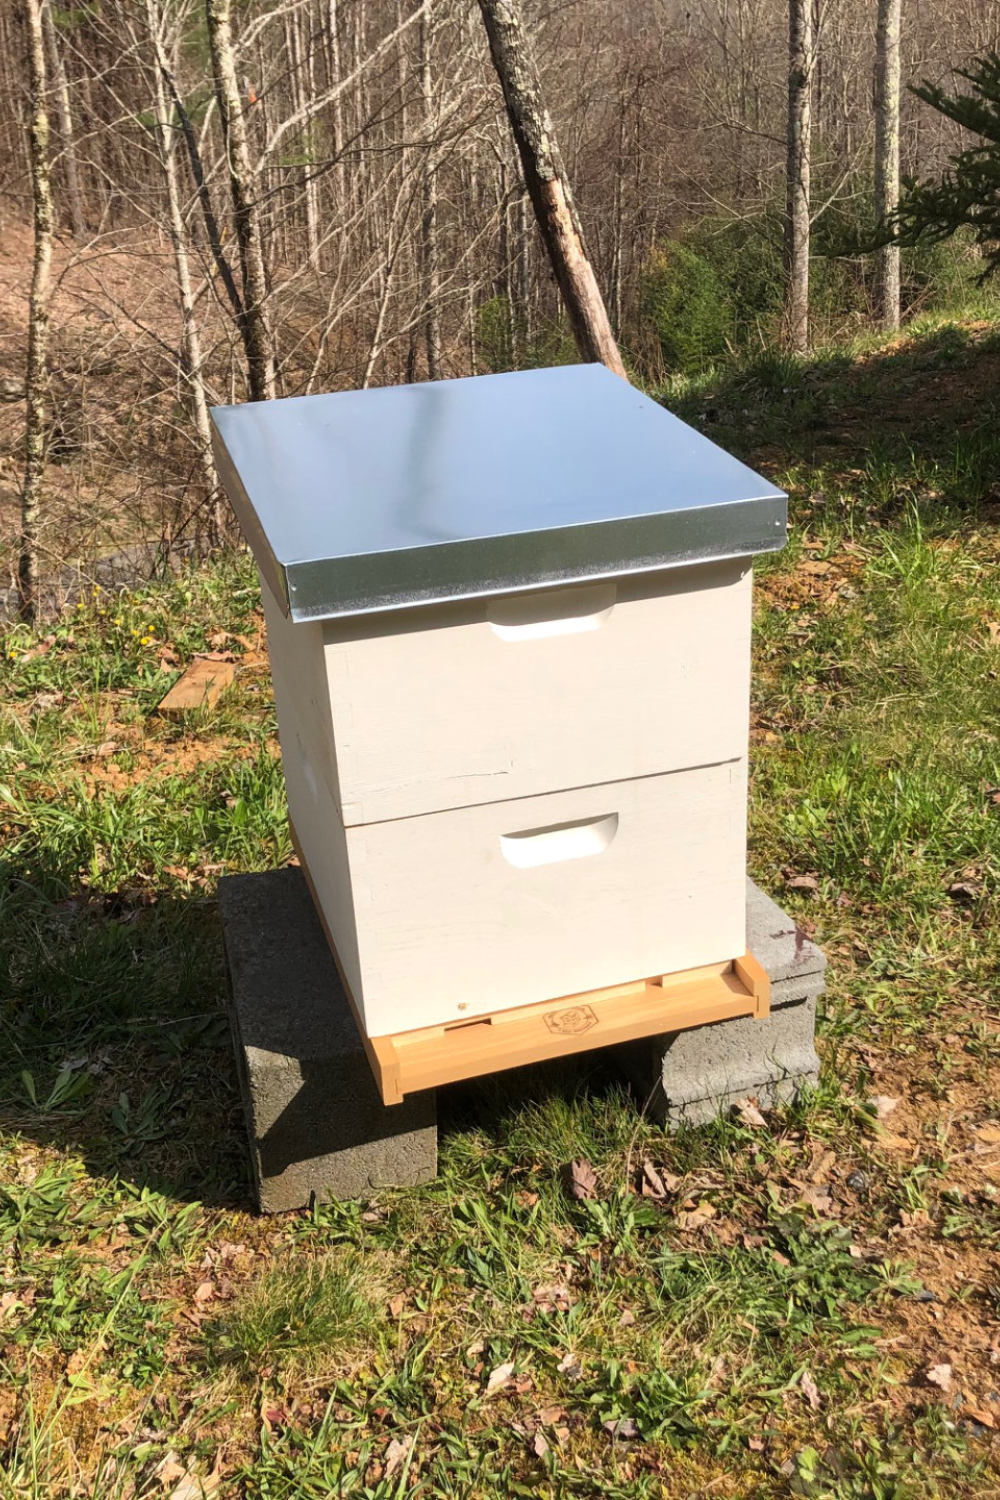 Beekeeping Basics - Articles and Guides